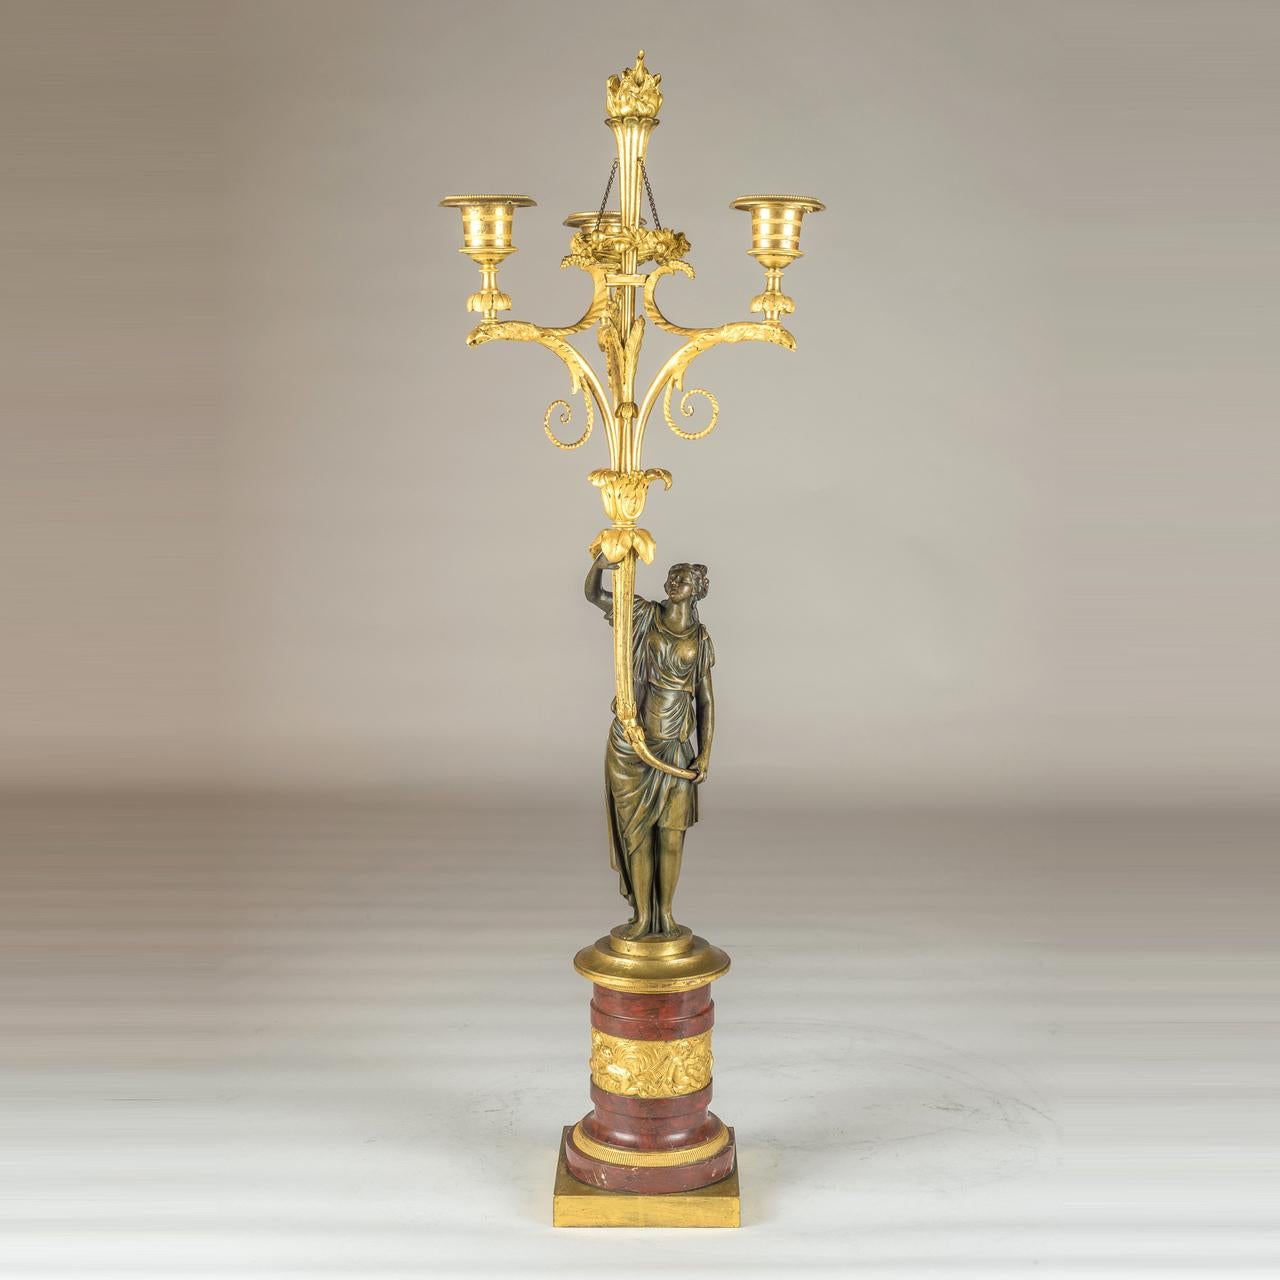 Raised on ormolu and rouge marble.?

Origin: French
Date: Circa 1780
Dimension: Height: 27 in. x 8 in.